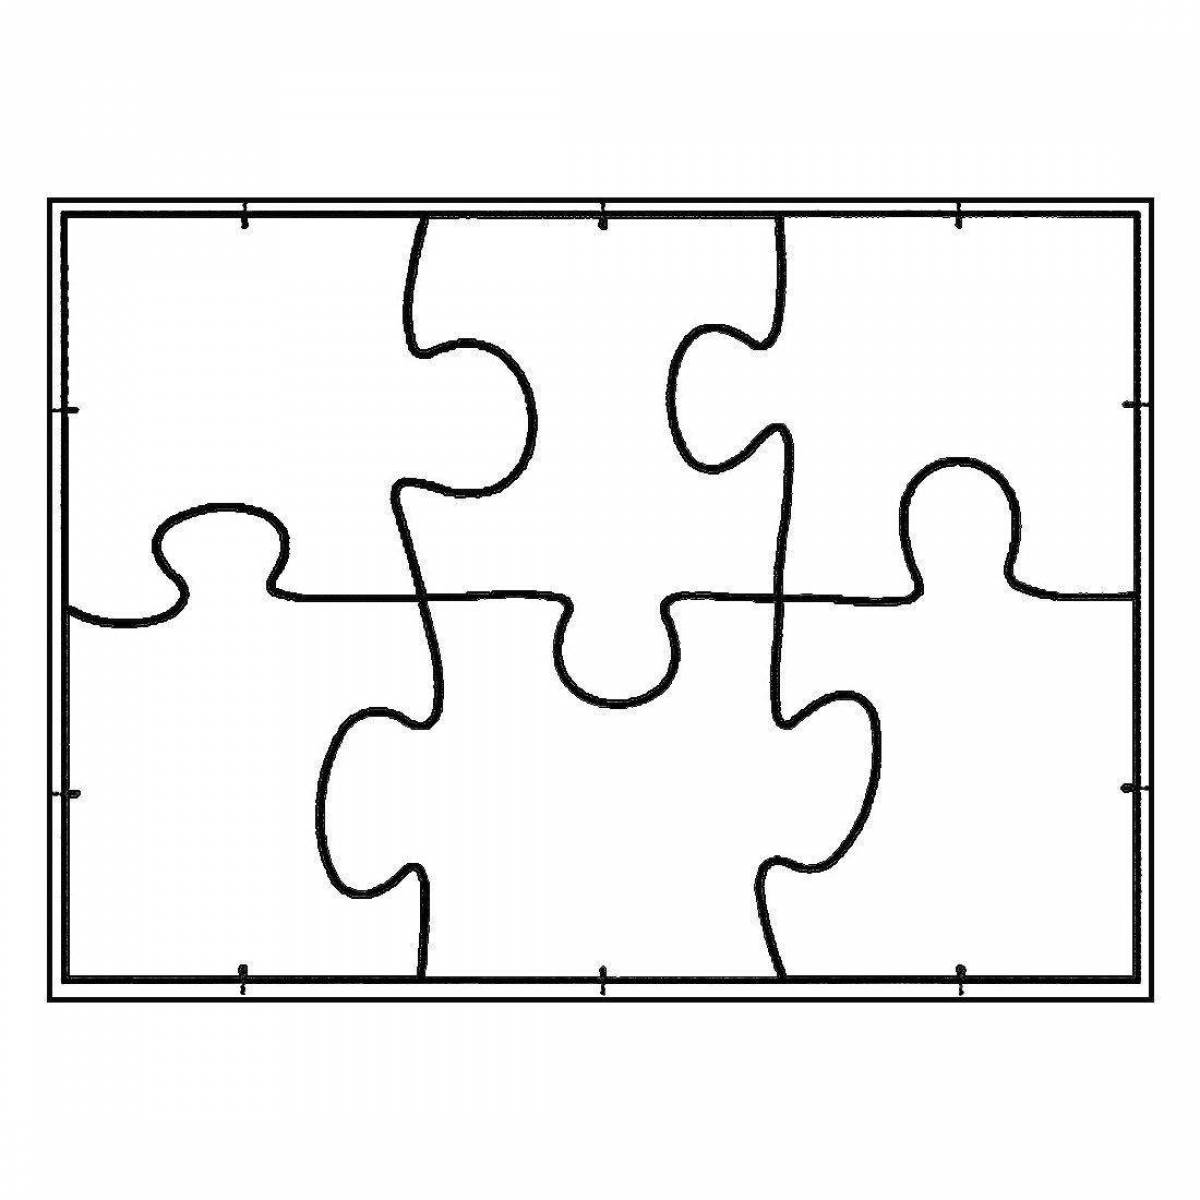 Fun puzzles for kids 3-4 years old